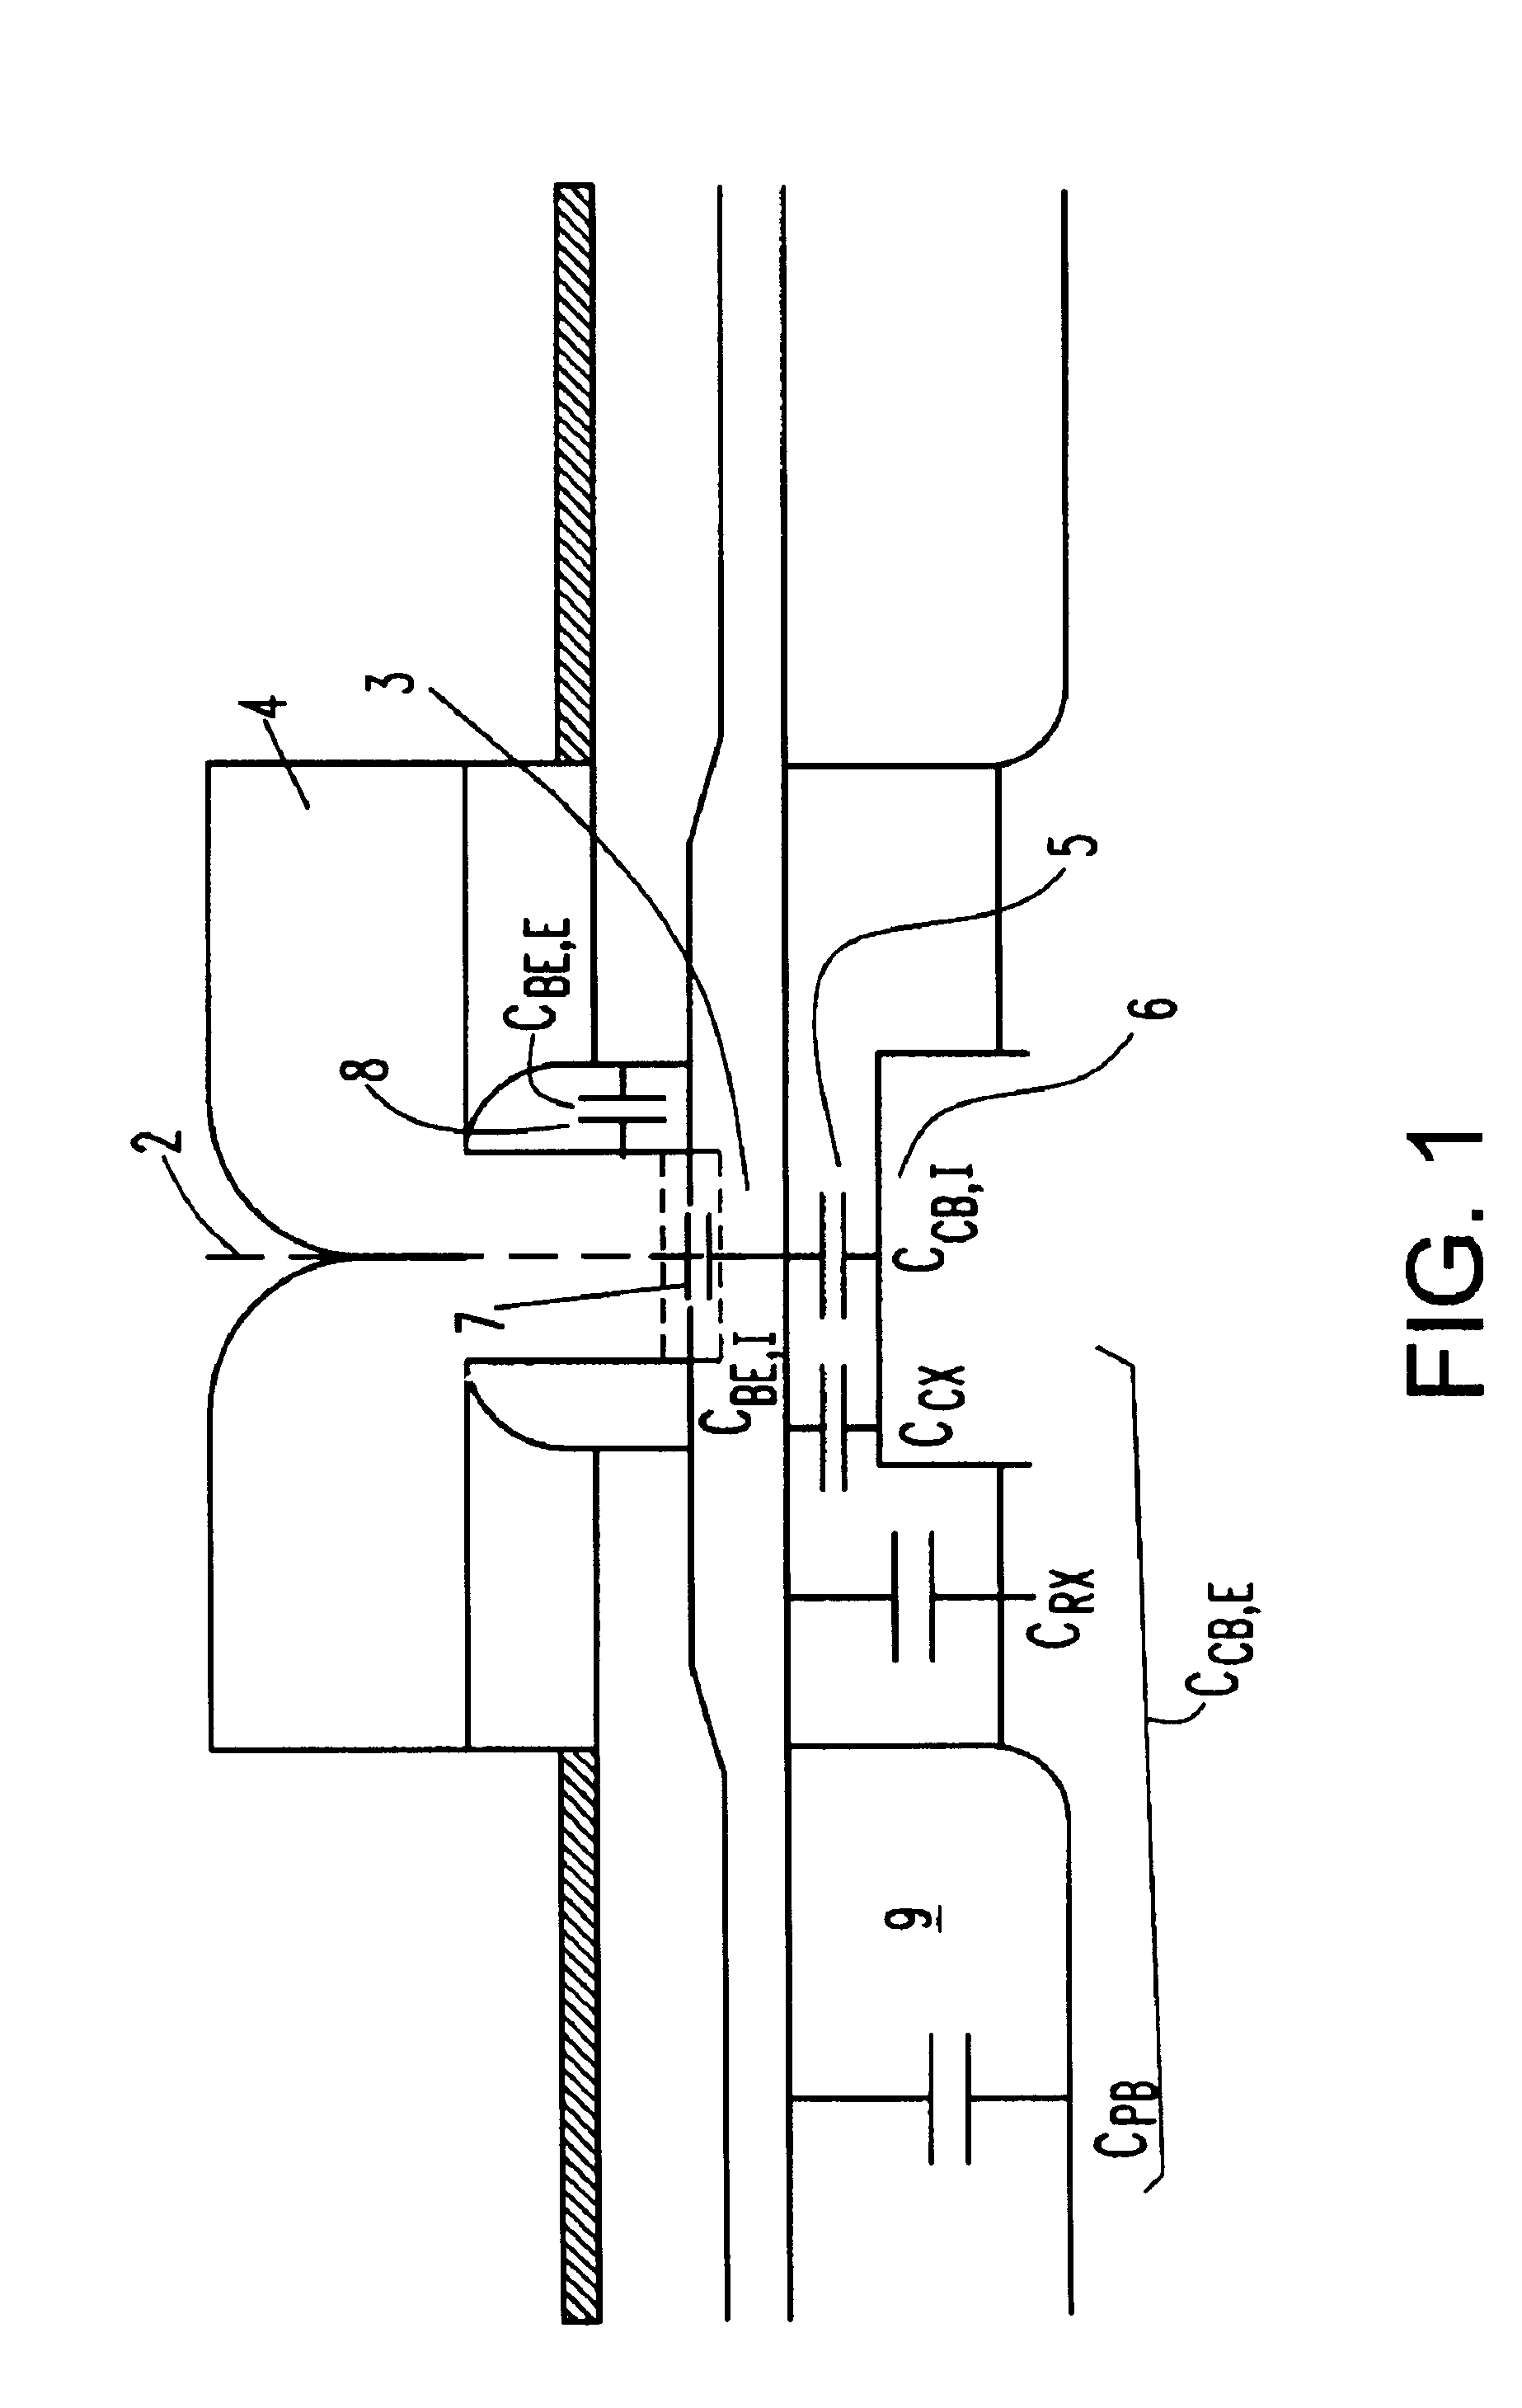 Structure and method of forming a bipolar transistor having a void between emitter and extrinsic base